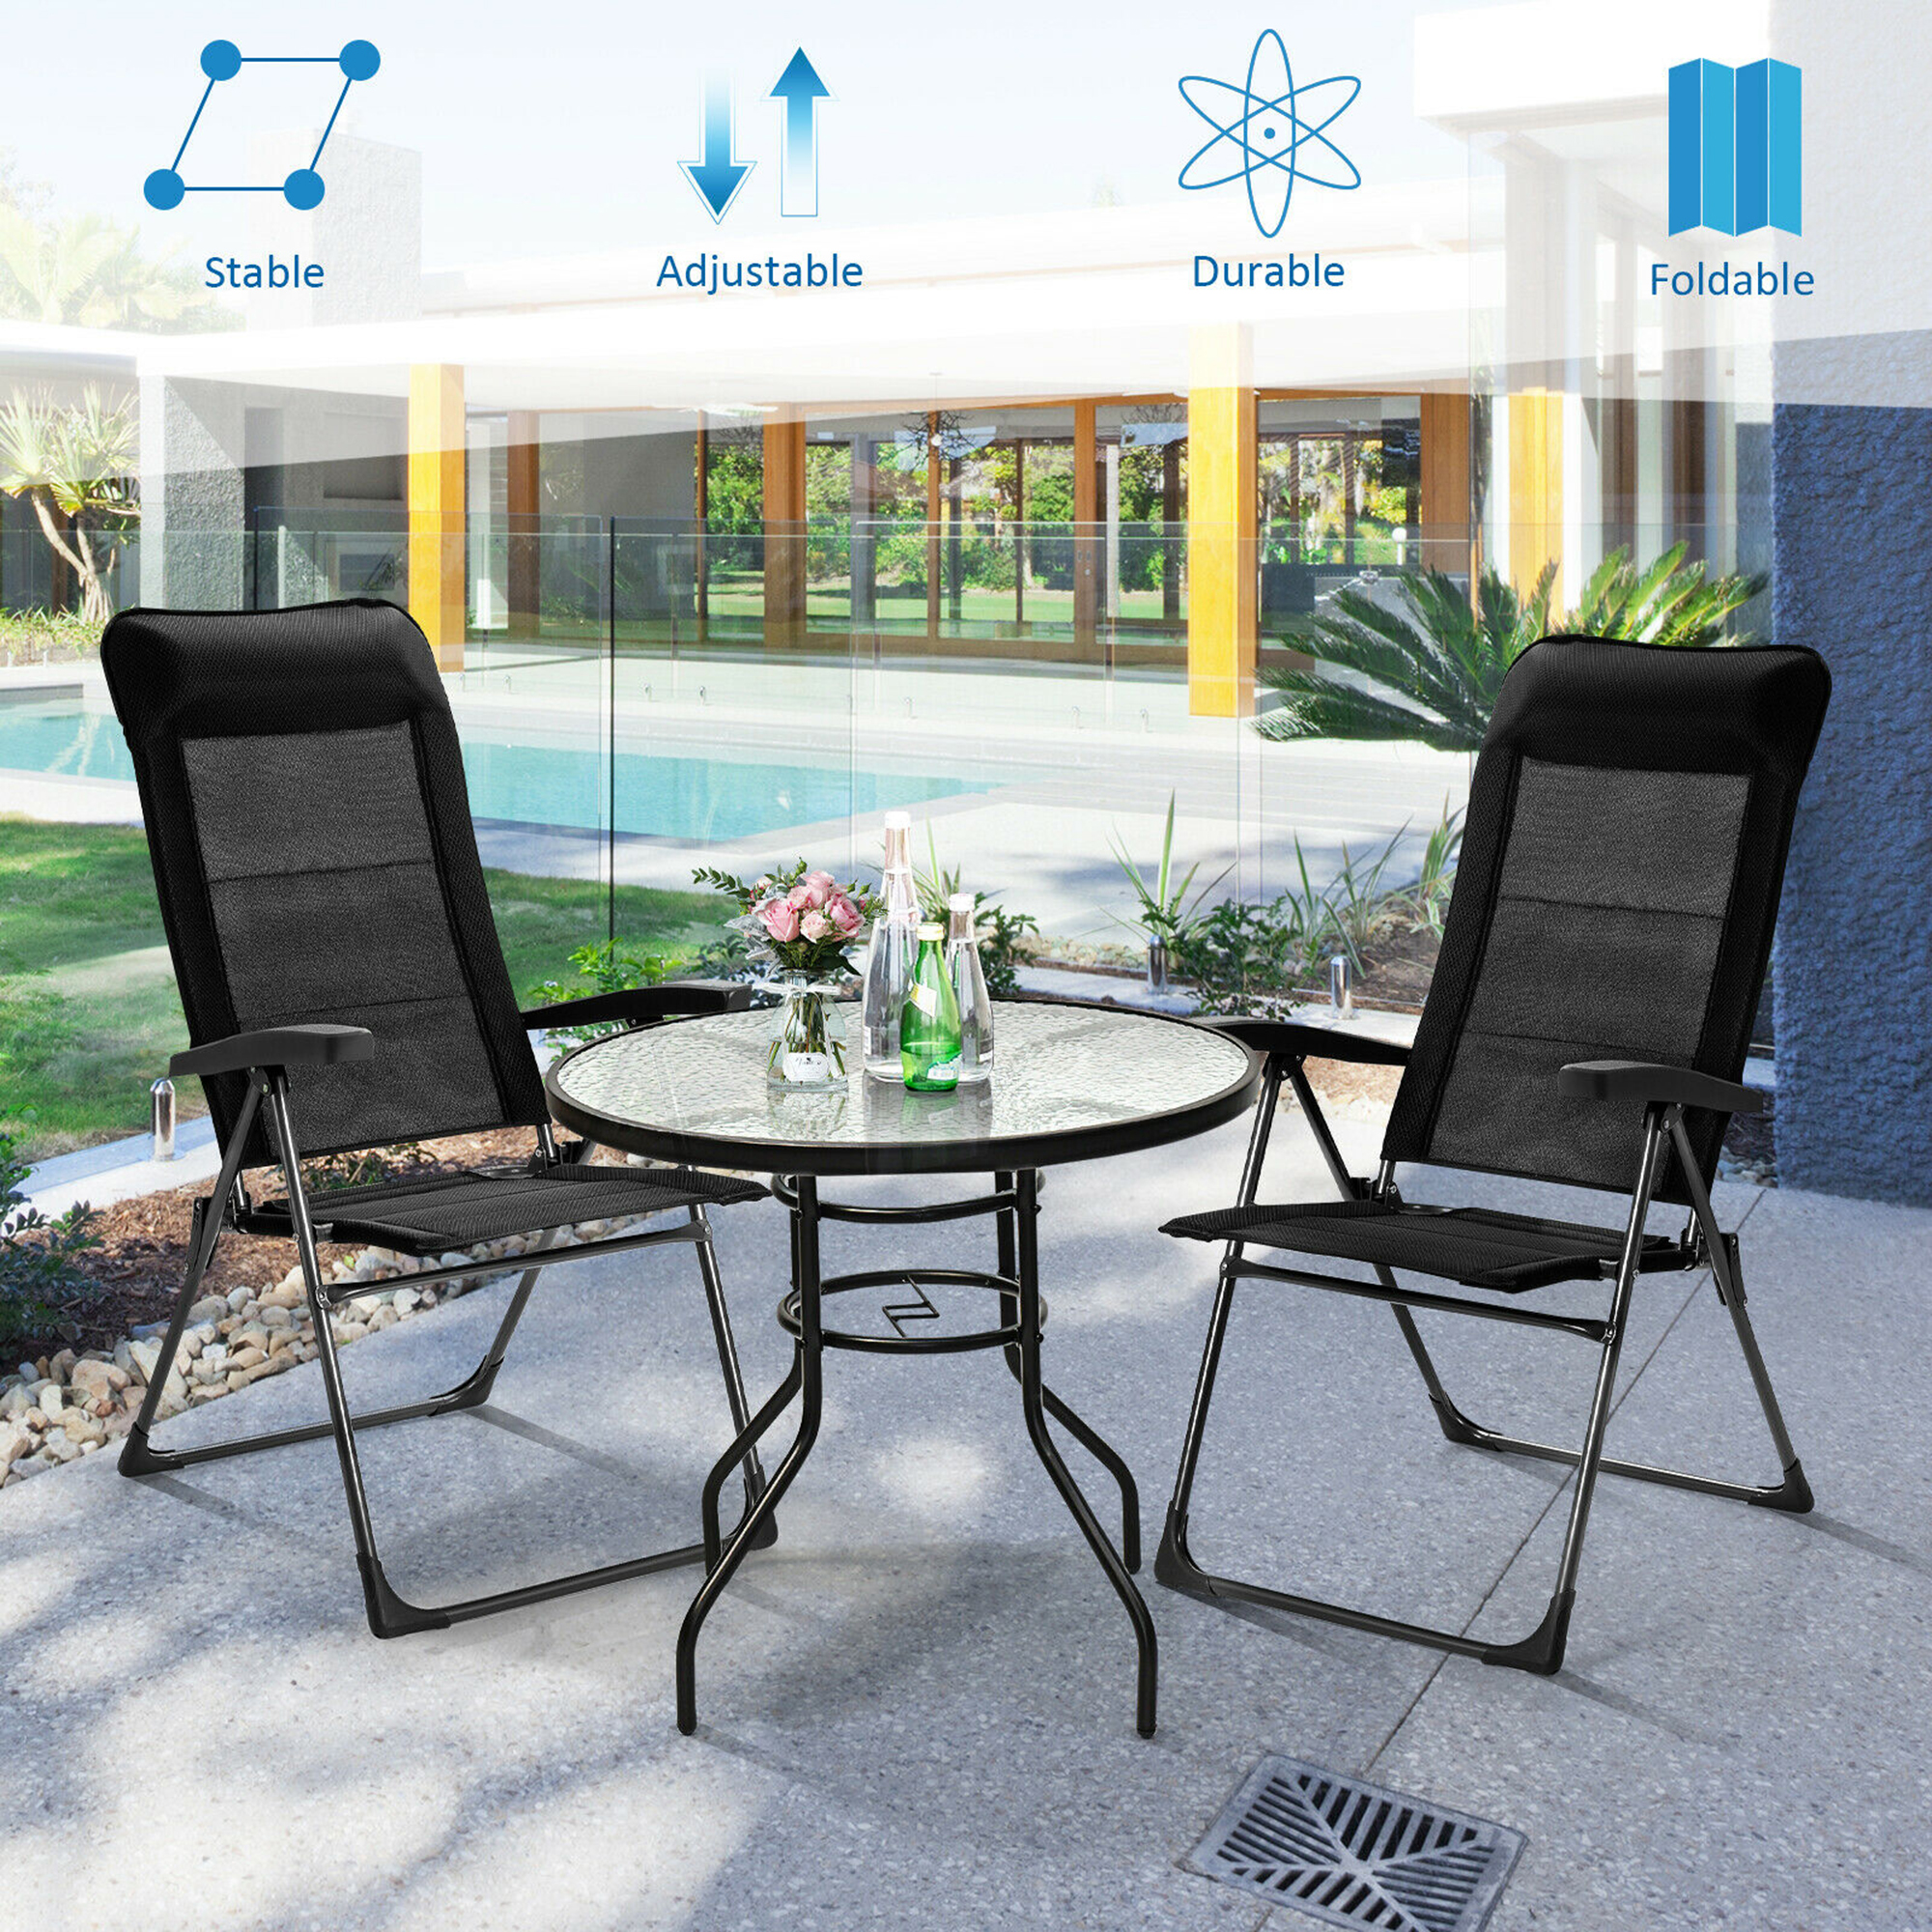 Gymax 2PCS Patio Folding Dining Chairs Portable Camping Headrest Adjust Black - image 5 of 10